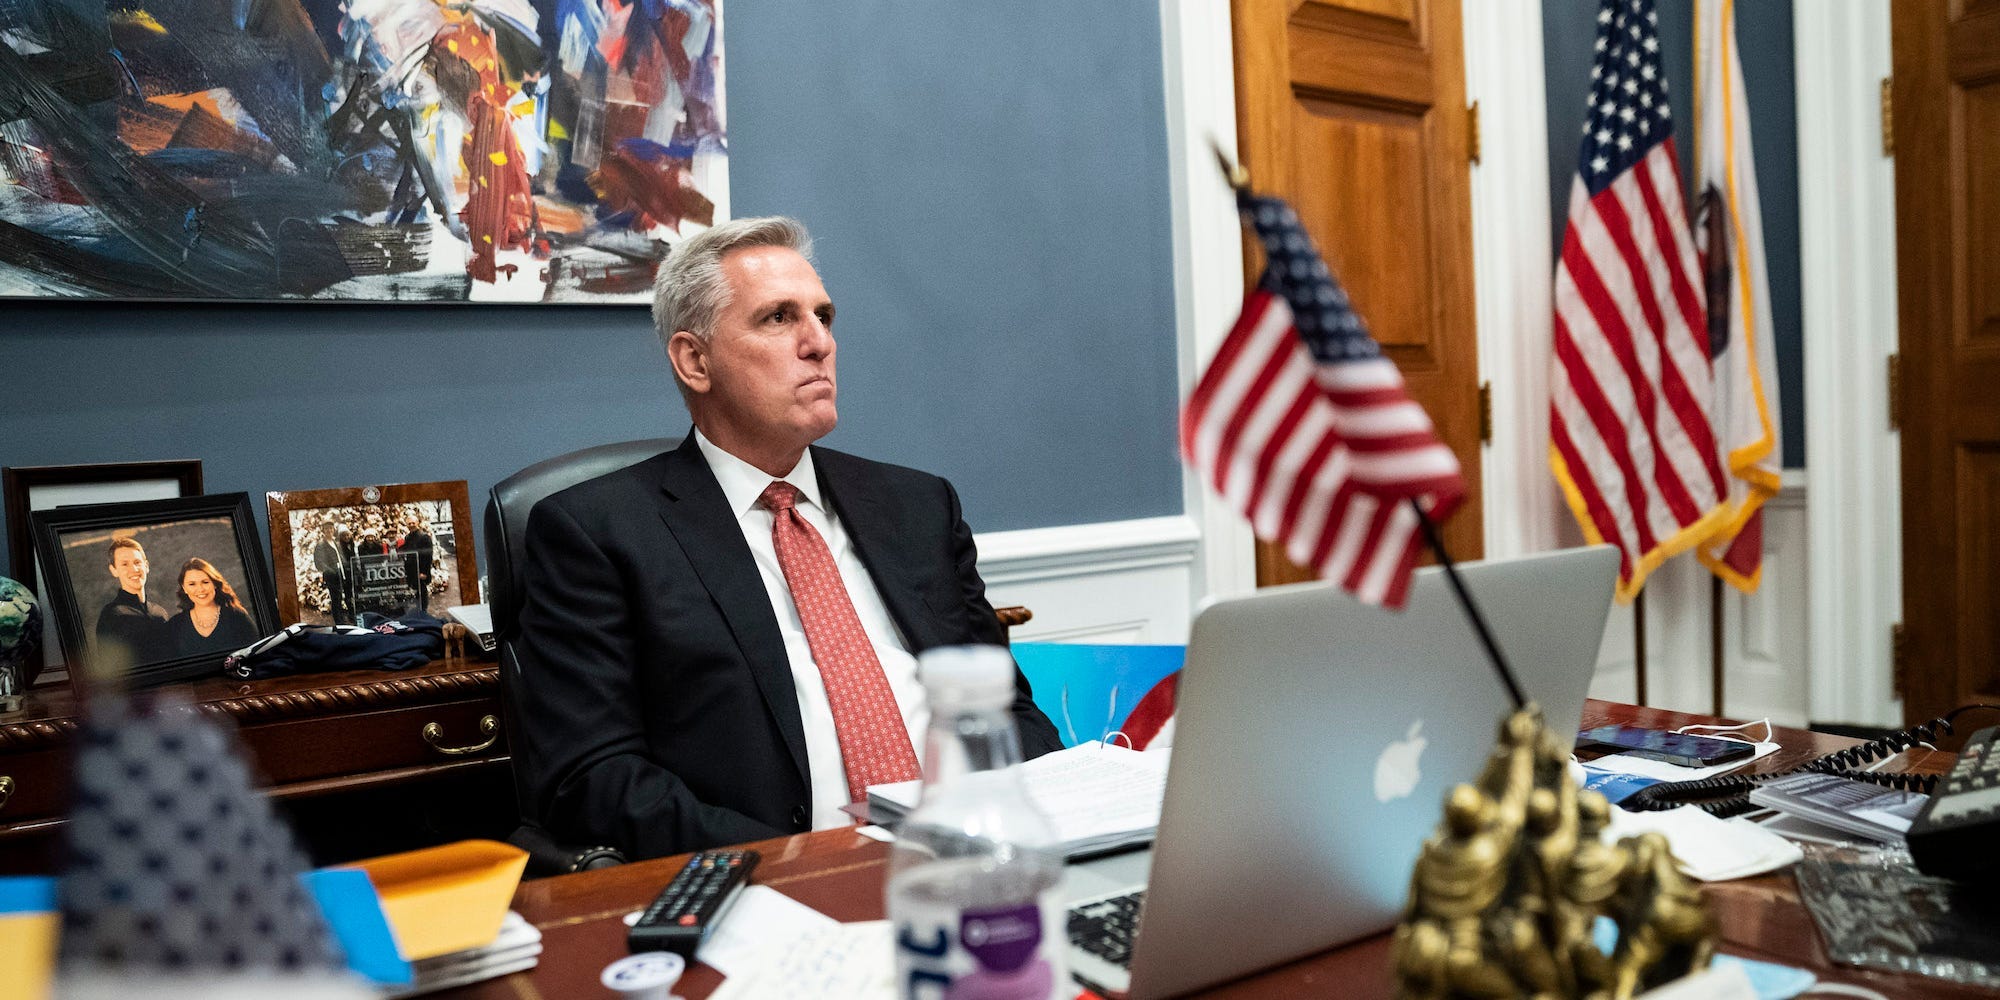 House Minority Leader Kevin McCarthy in his office on Capitol Hill on November 18, 2021.